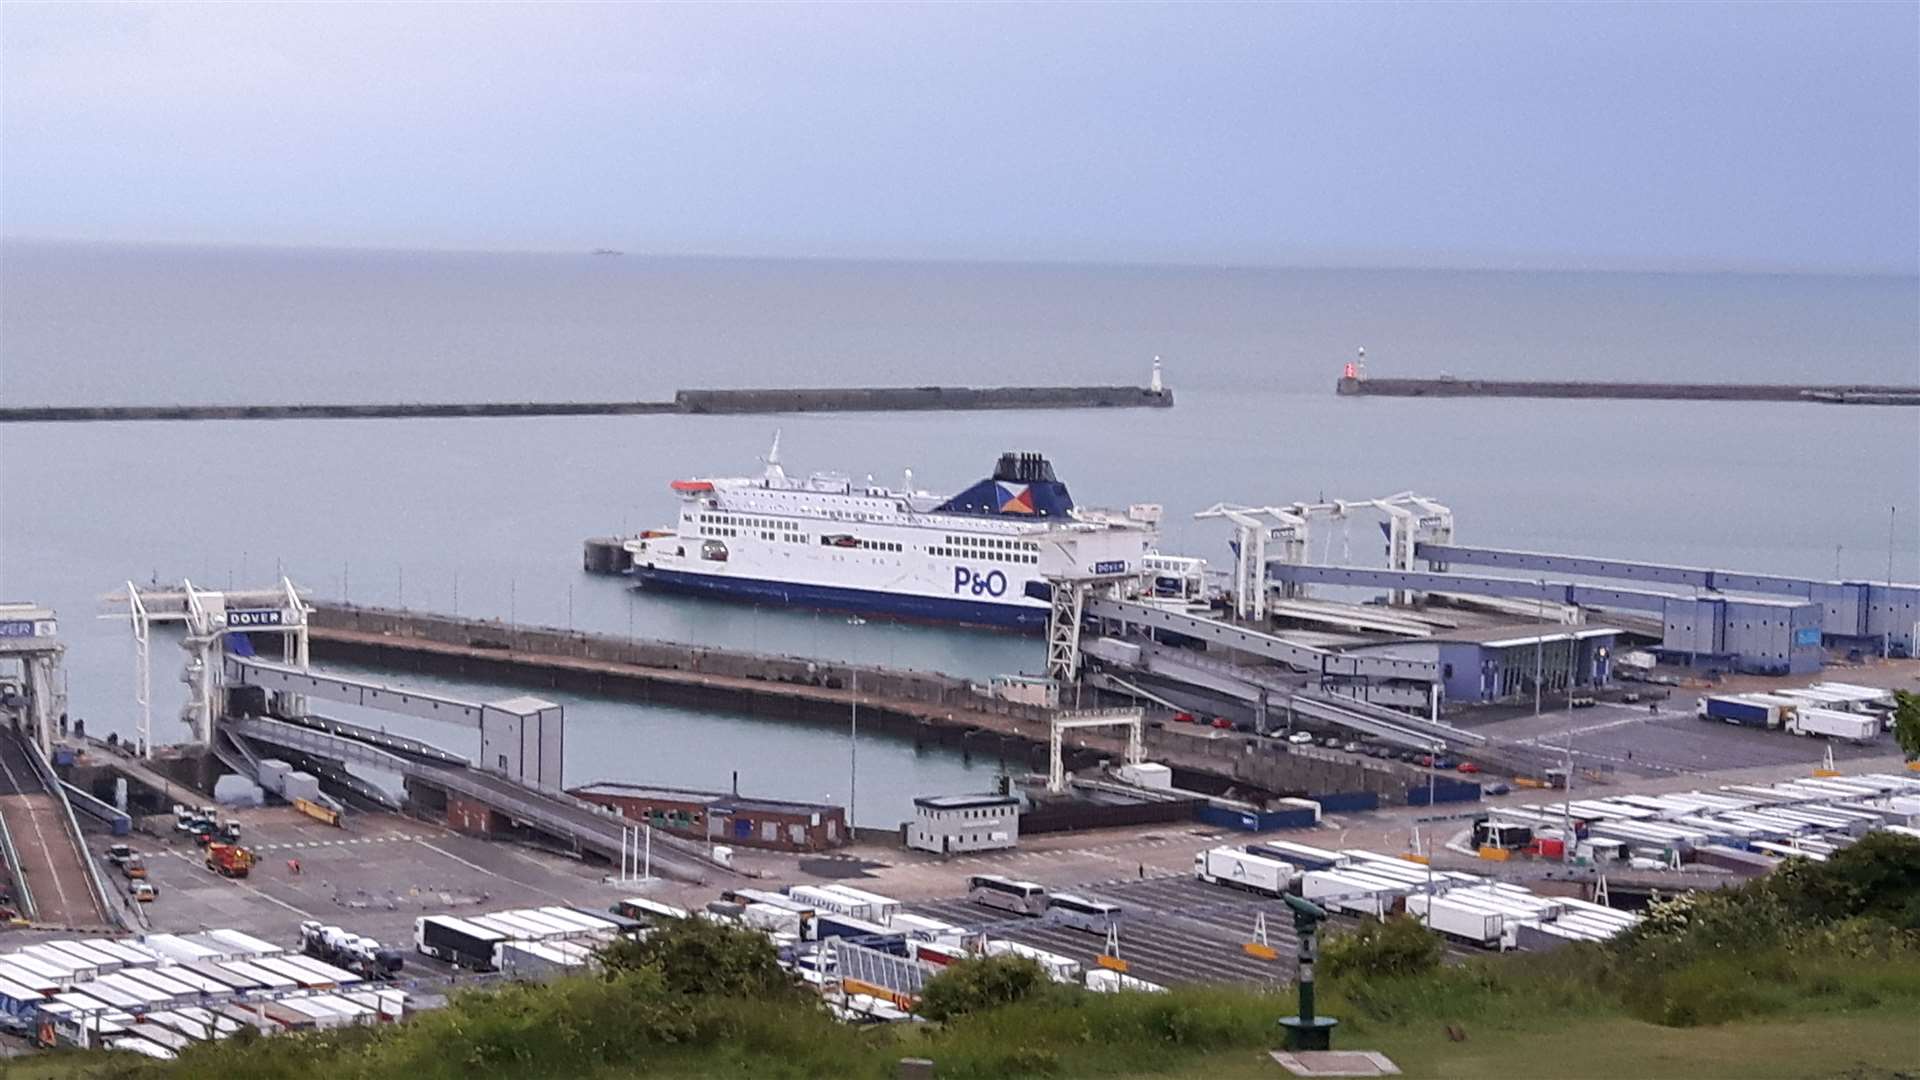 P&O Ferries is now running a reduced freight-only service but is losing thousands where the coronavirus travel ban made tourism traffic bookings dry up